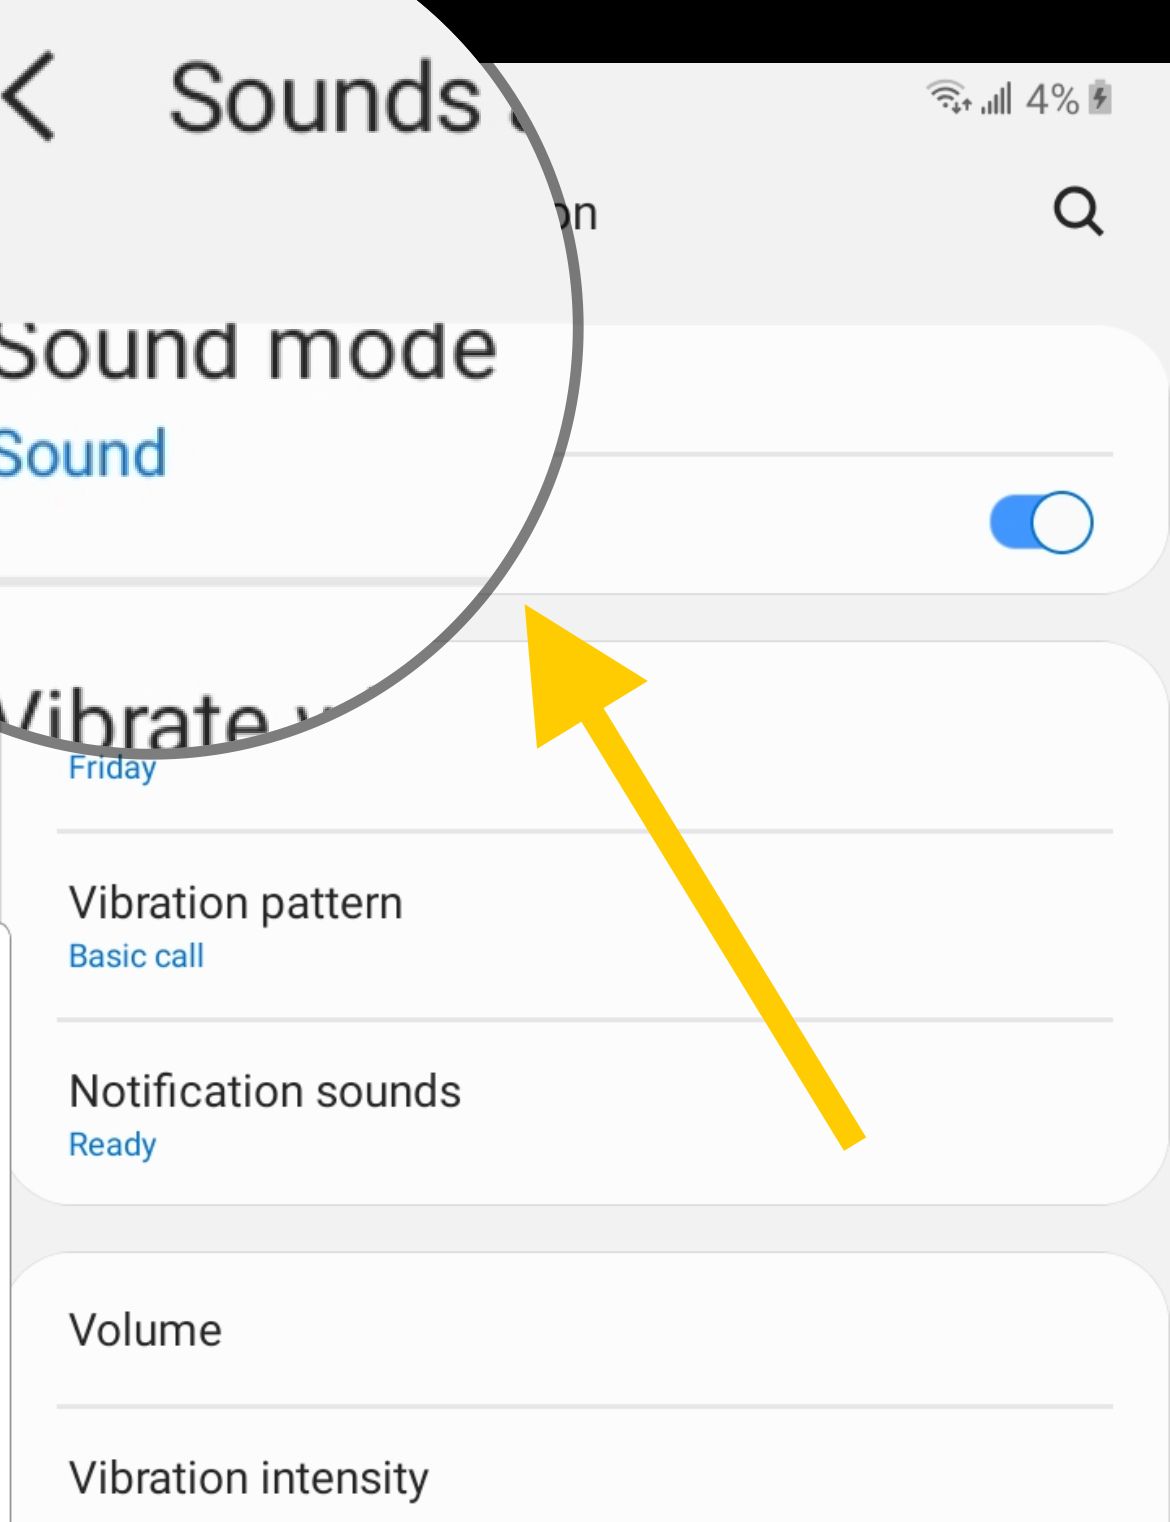 What is causing the failure of audio during phone calls on the Galaxy A50, and what can be done to rectify the situation, particularly with regard to poor volume or malfunctioning sound?